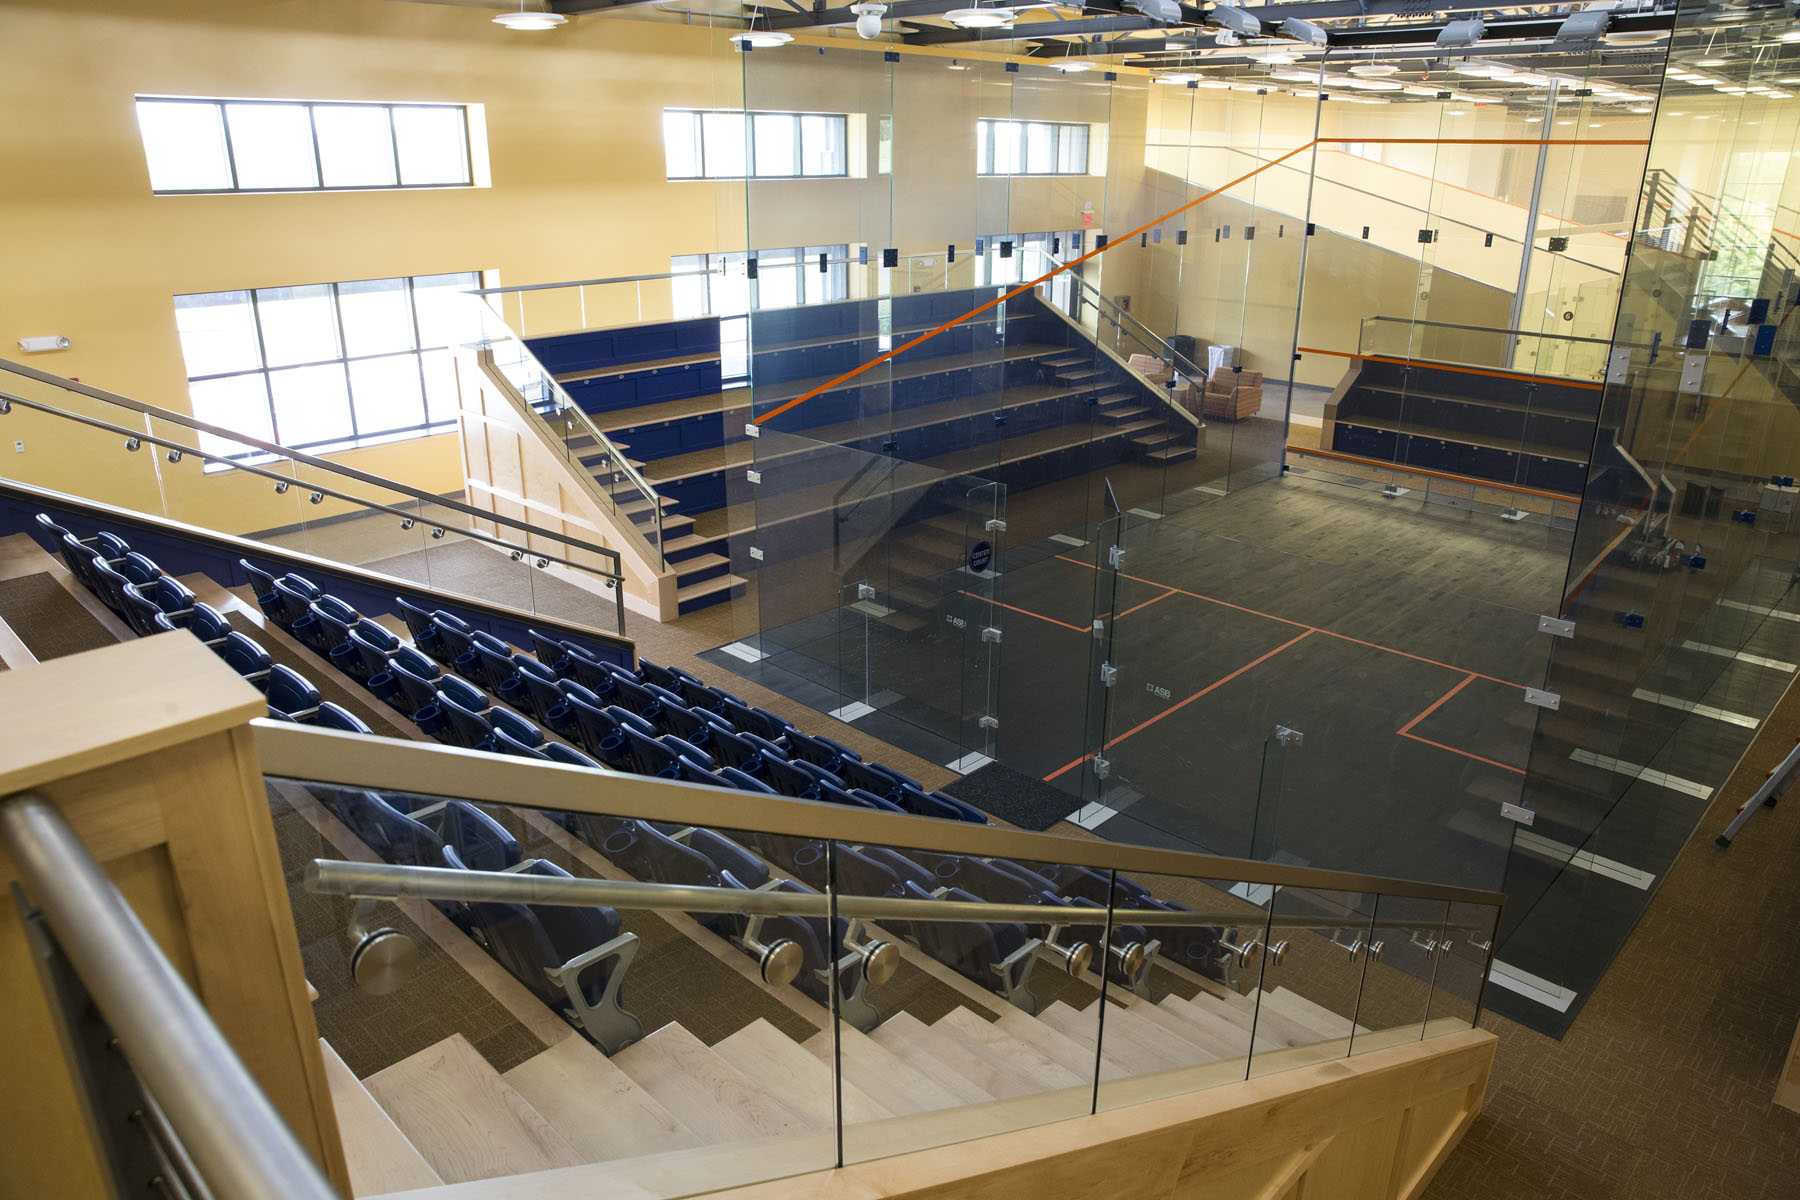 Glass Squash court surrounded by bleachers